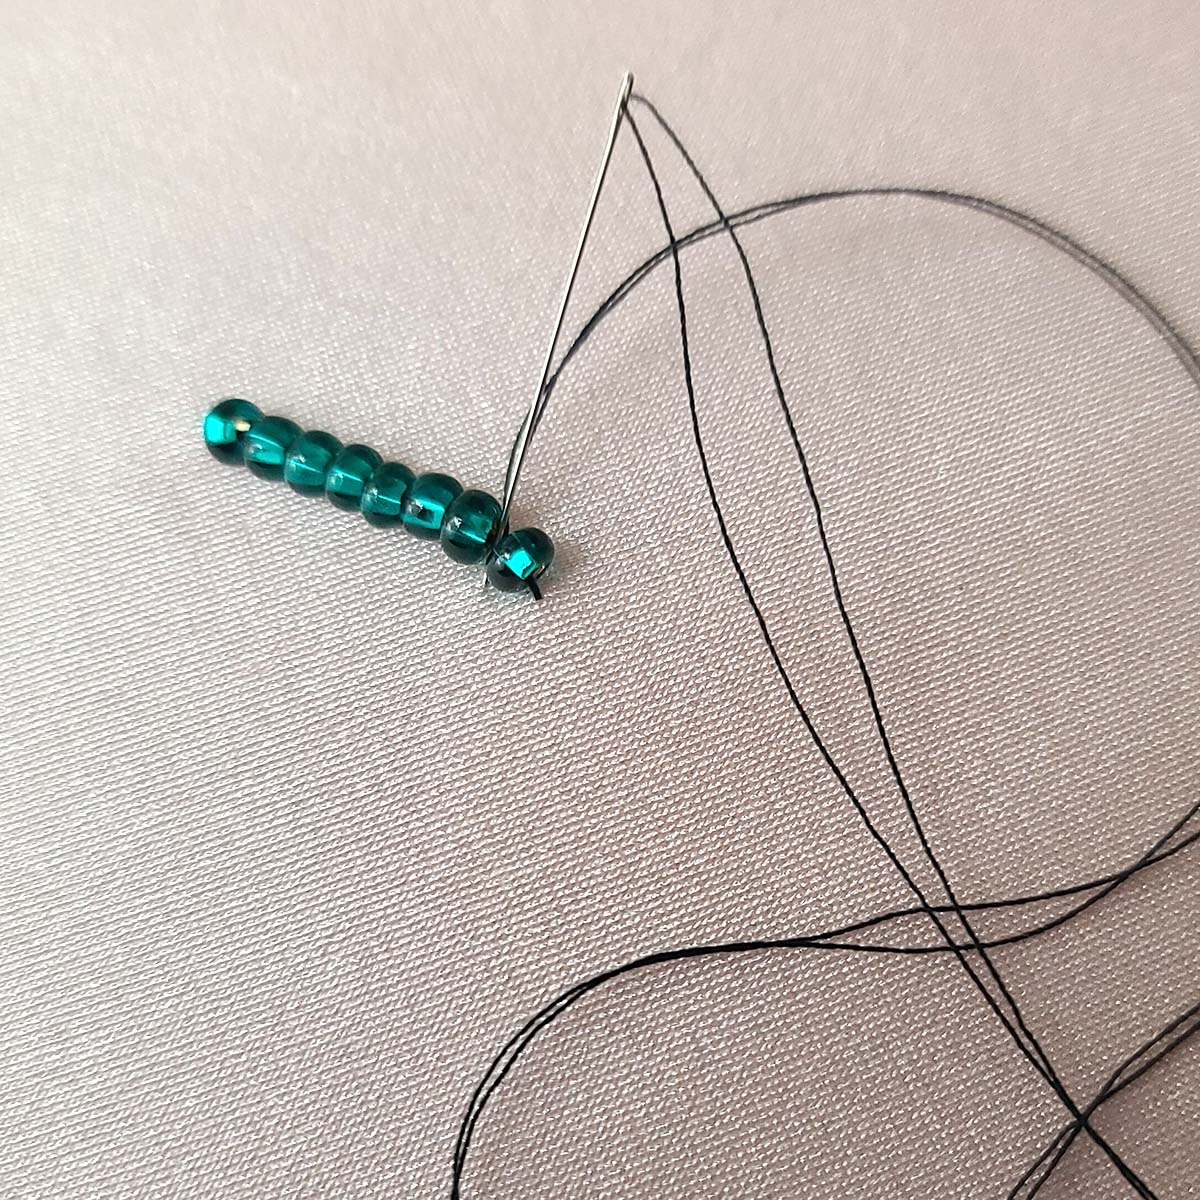 Black thread is being used to sew a short line of dark green rocaille beads to a stretched piece of light pink spandex.